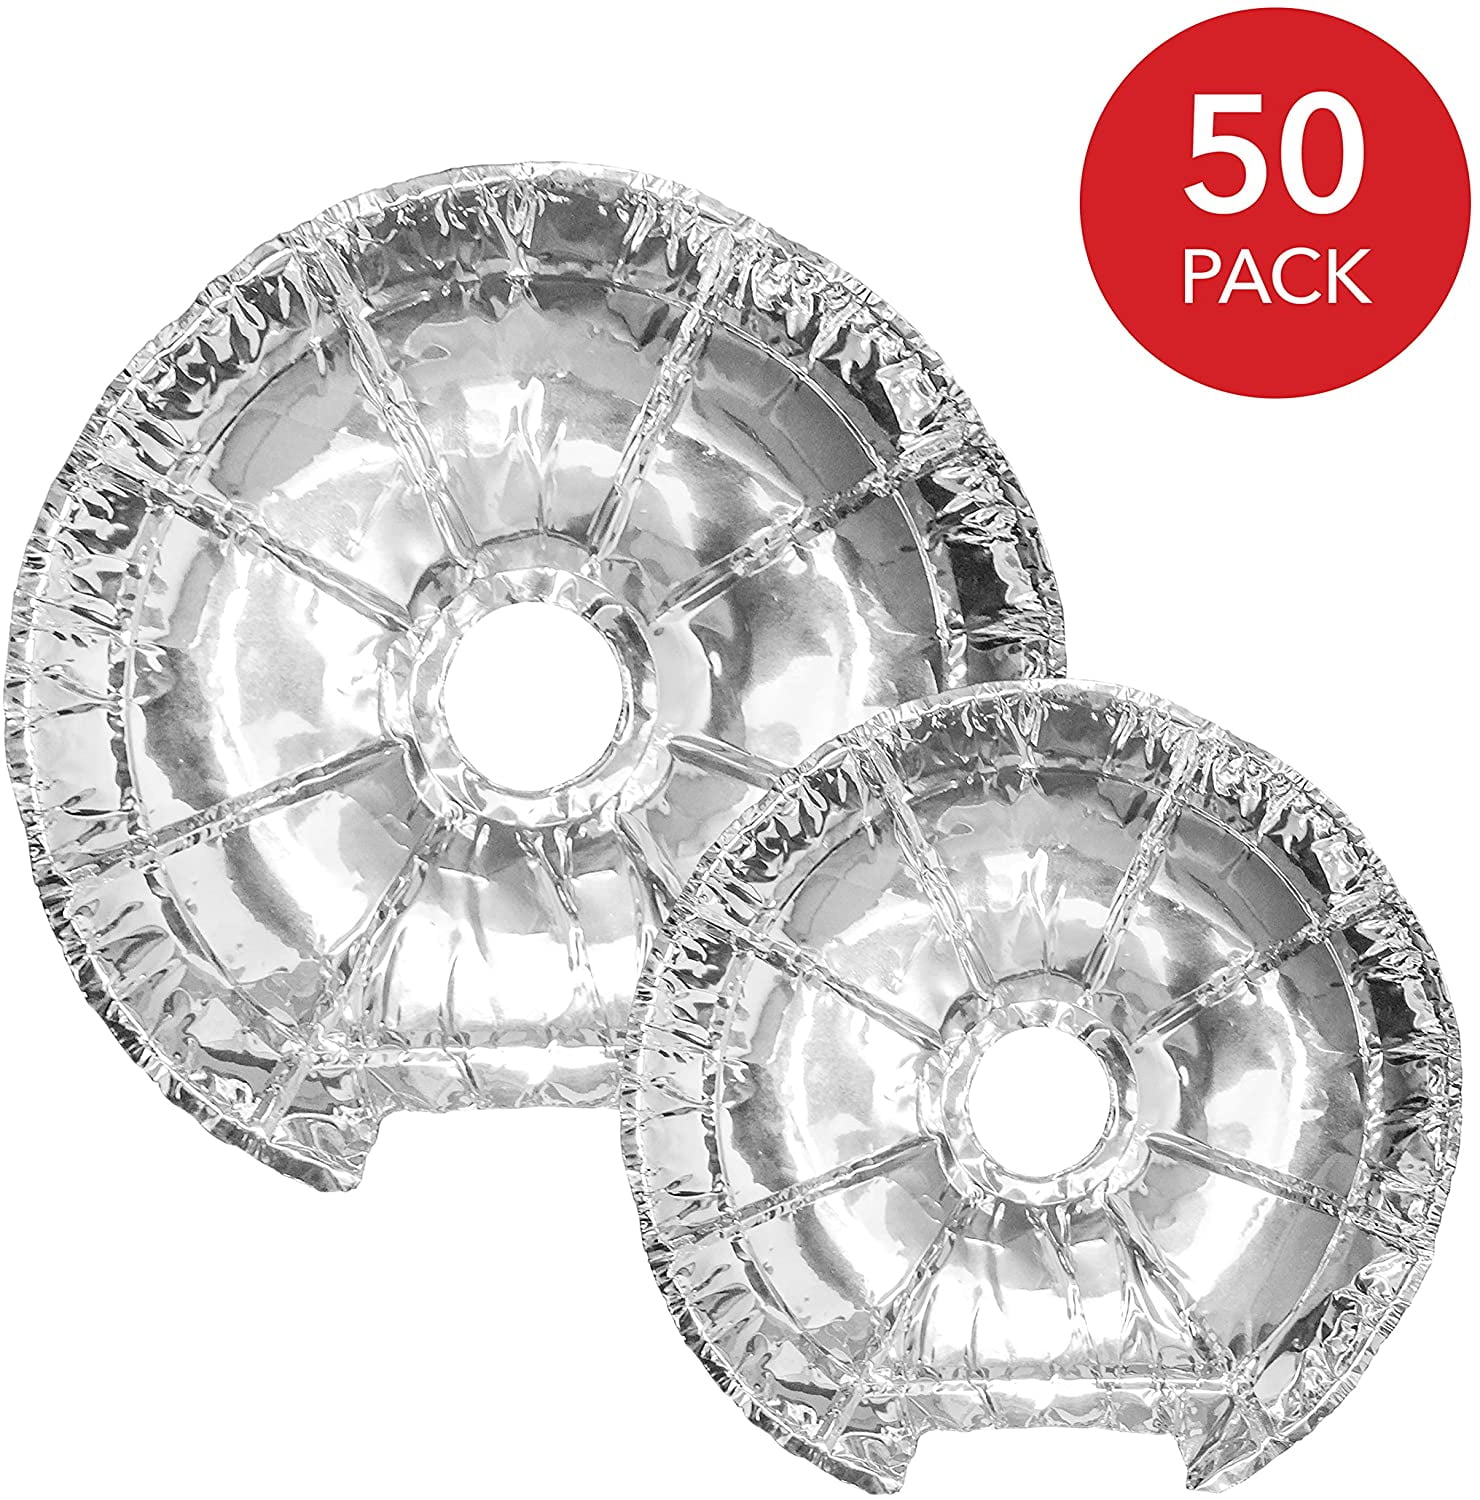 50 Pcs Electric Stove Covers Disposable Aluminum Foil Bib Liners Gas Hob Protector HaavPoois Stove Clean Liners 